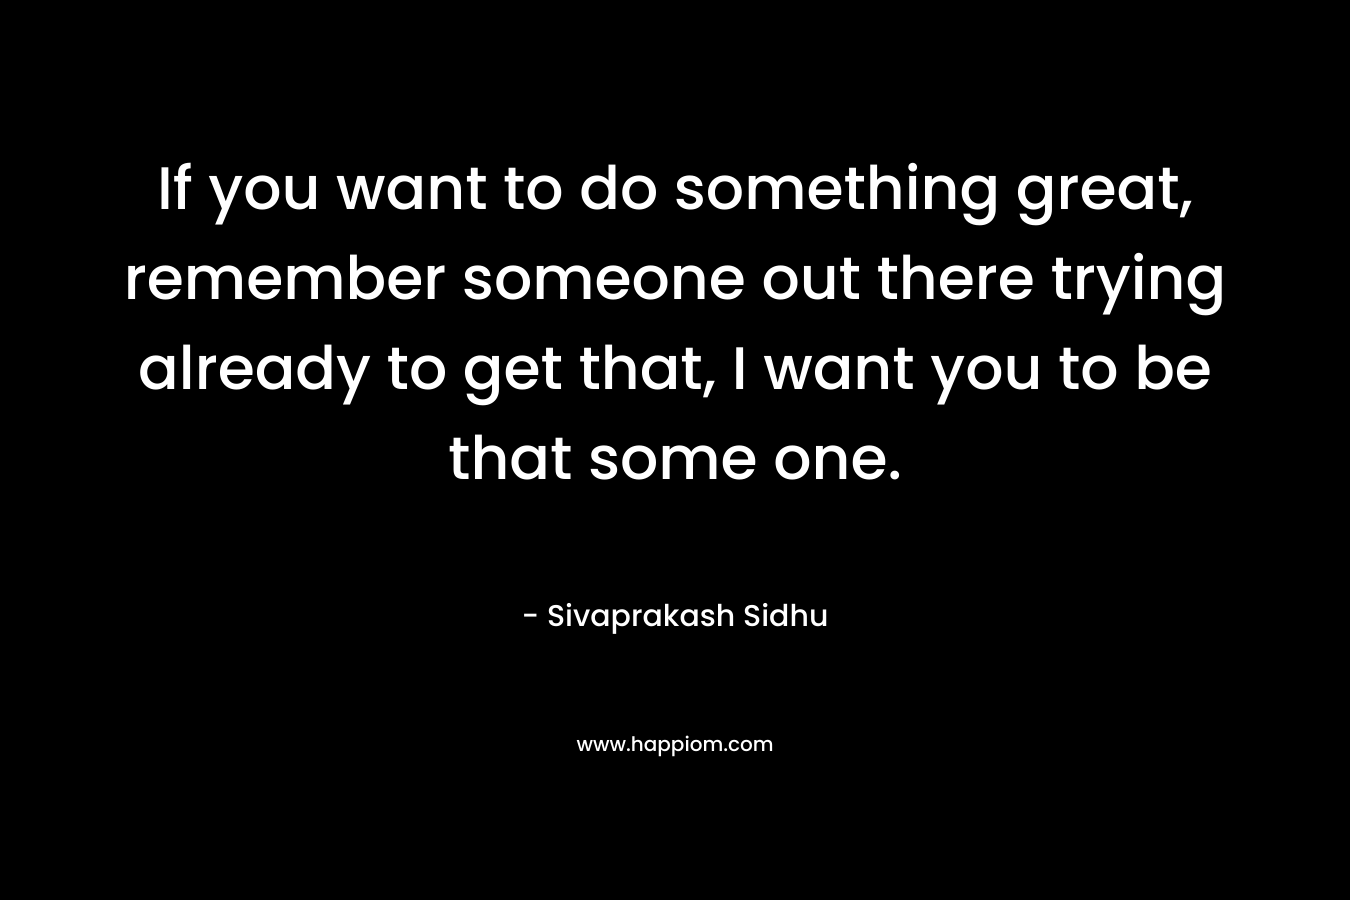 If you want to do something great, remember someone out there trying already to get that, I want you to be that some one. – Sivaprakash Sidhu